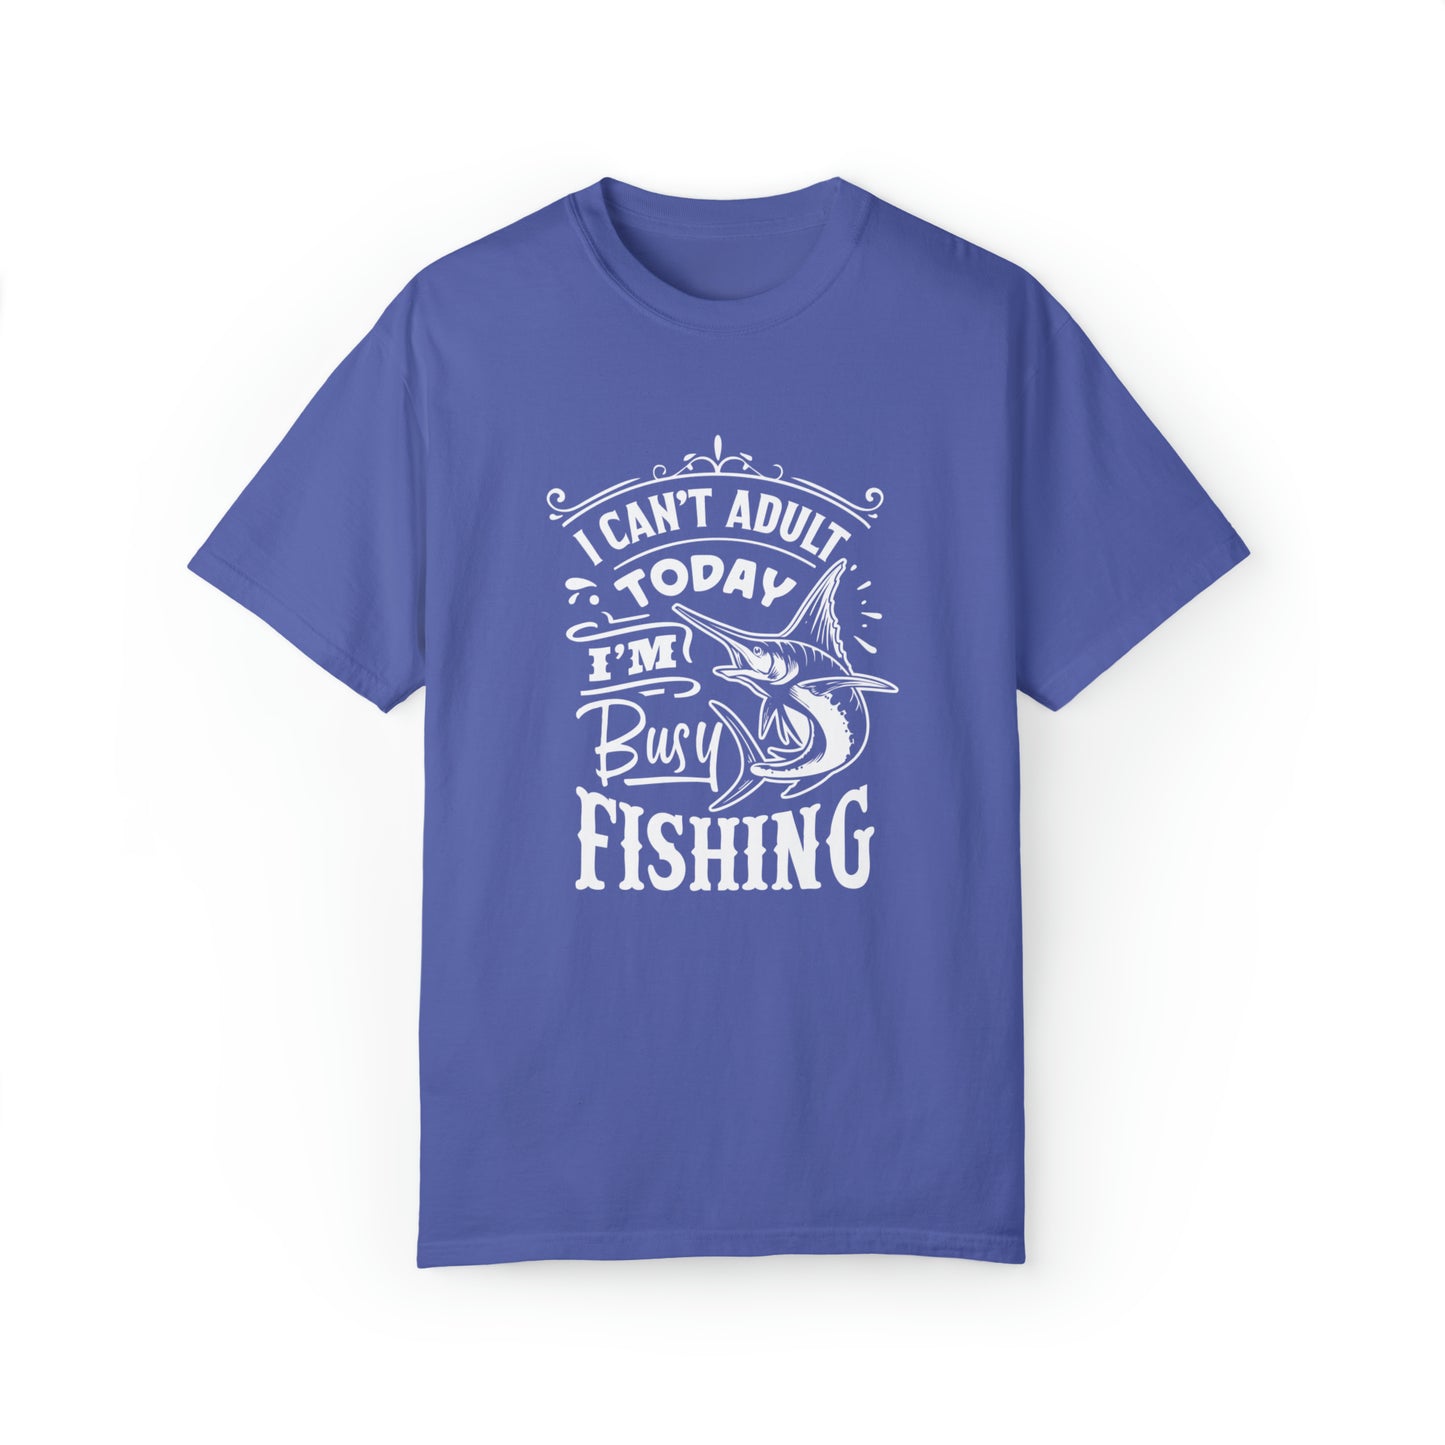 "I'm Not Adulting Today, I'm Busy Fishing" T-Shirt